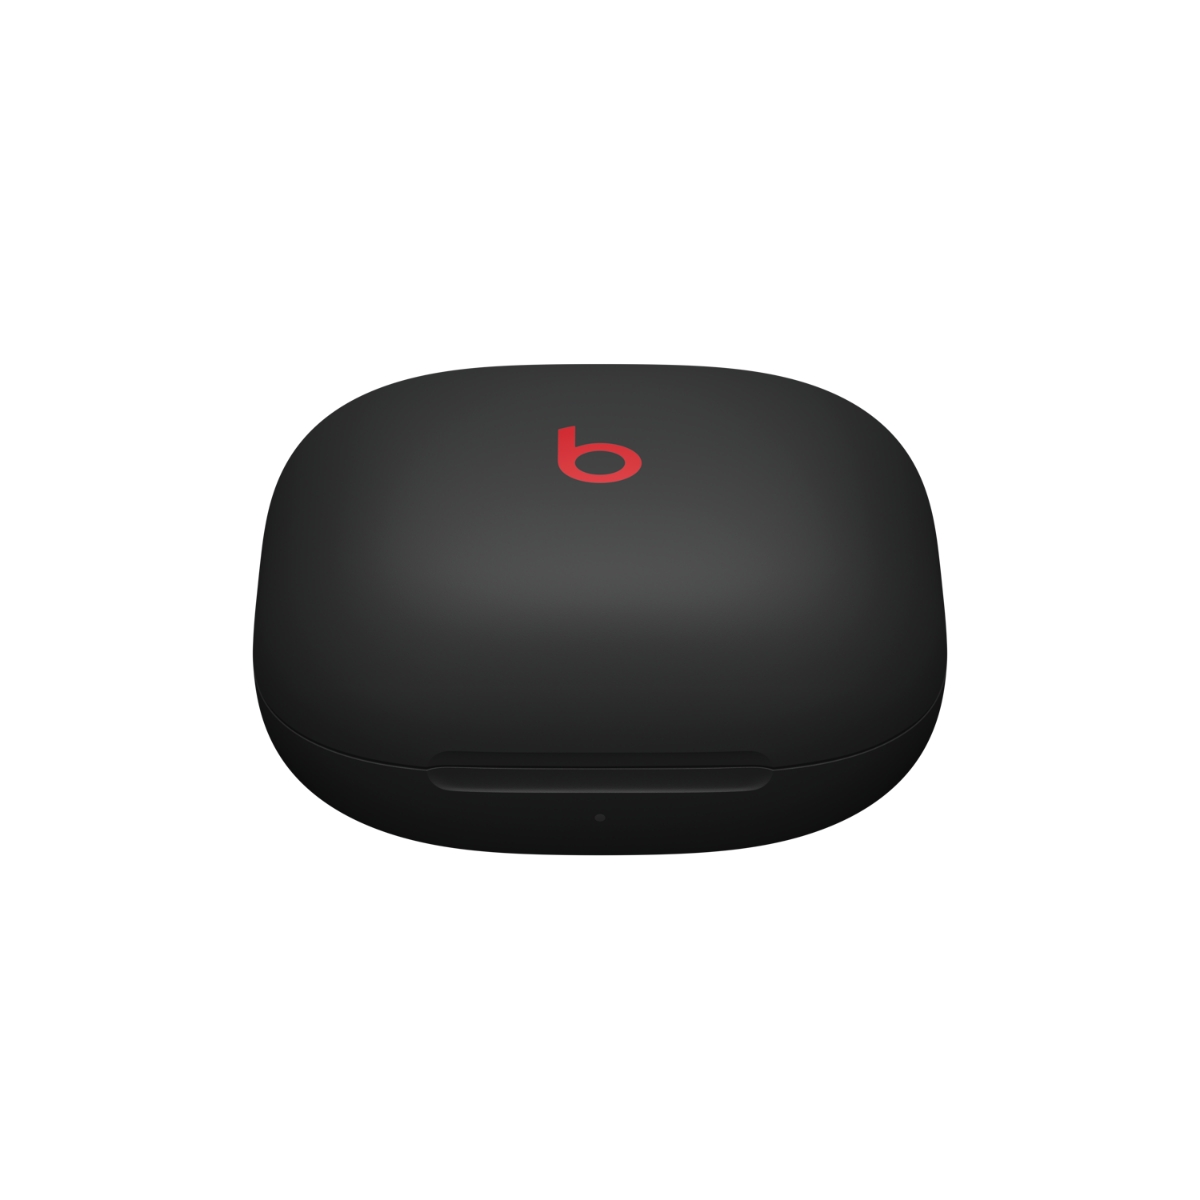 Beats Fit Pro Noise Cancelling Wireless Earbuds, Active Noise Cancelling  Earbuds with Charging Case